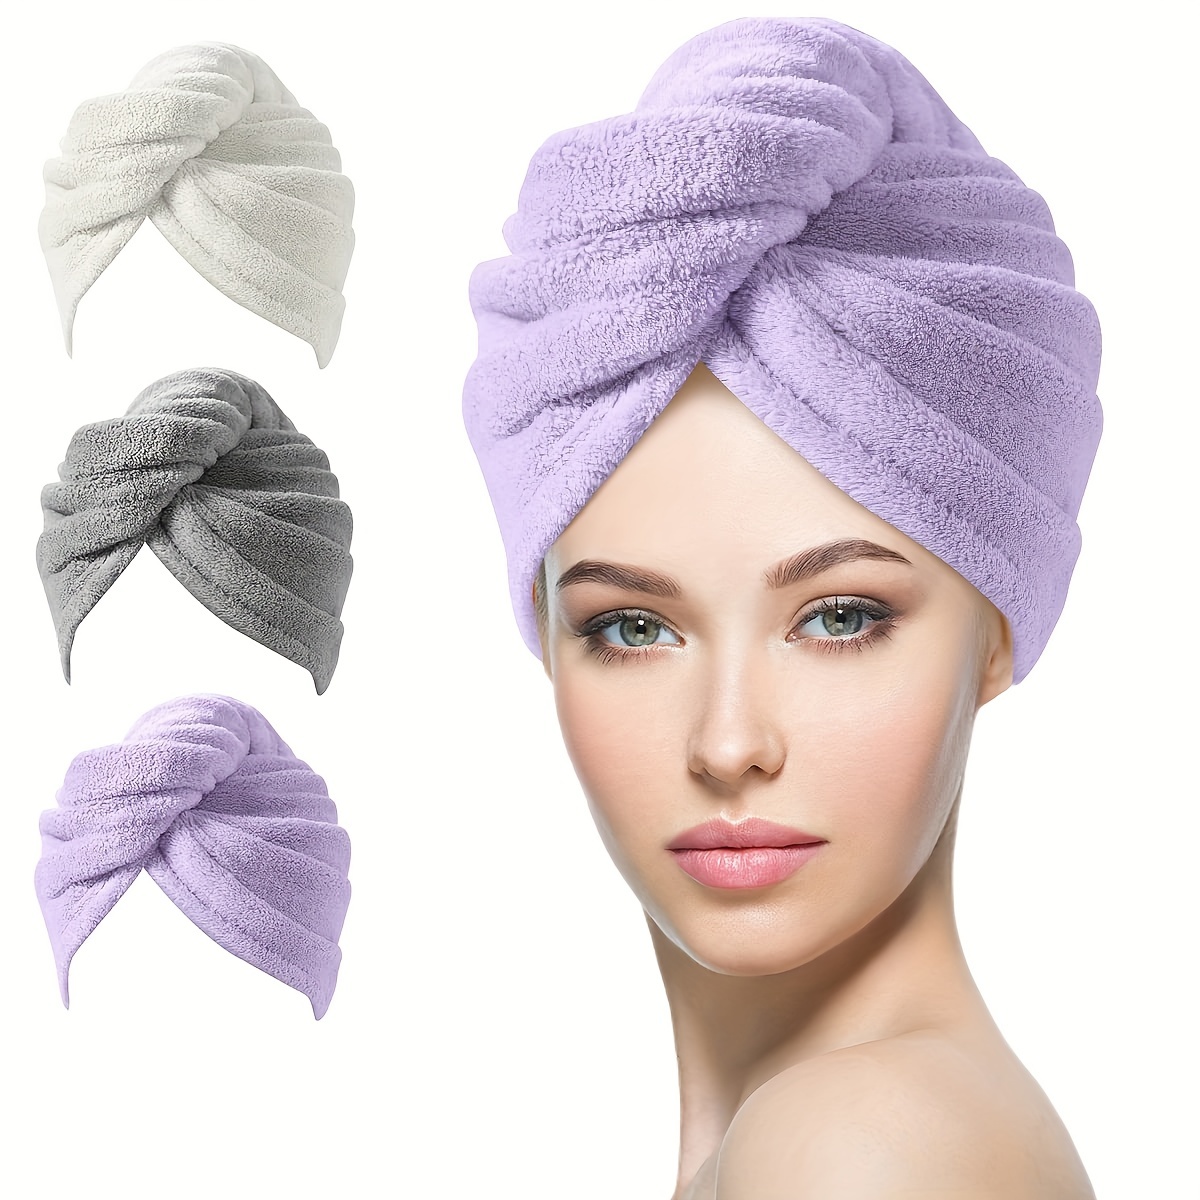 

3pcs Hair Towel Wrap For Women, Rapid Drying Towels For Hair With Button, Water Absorbent Hair Turbans For Wet Hair Long Thick Curly Hair, Soft Hair Drying Towel Wrap